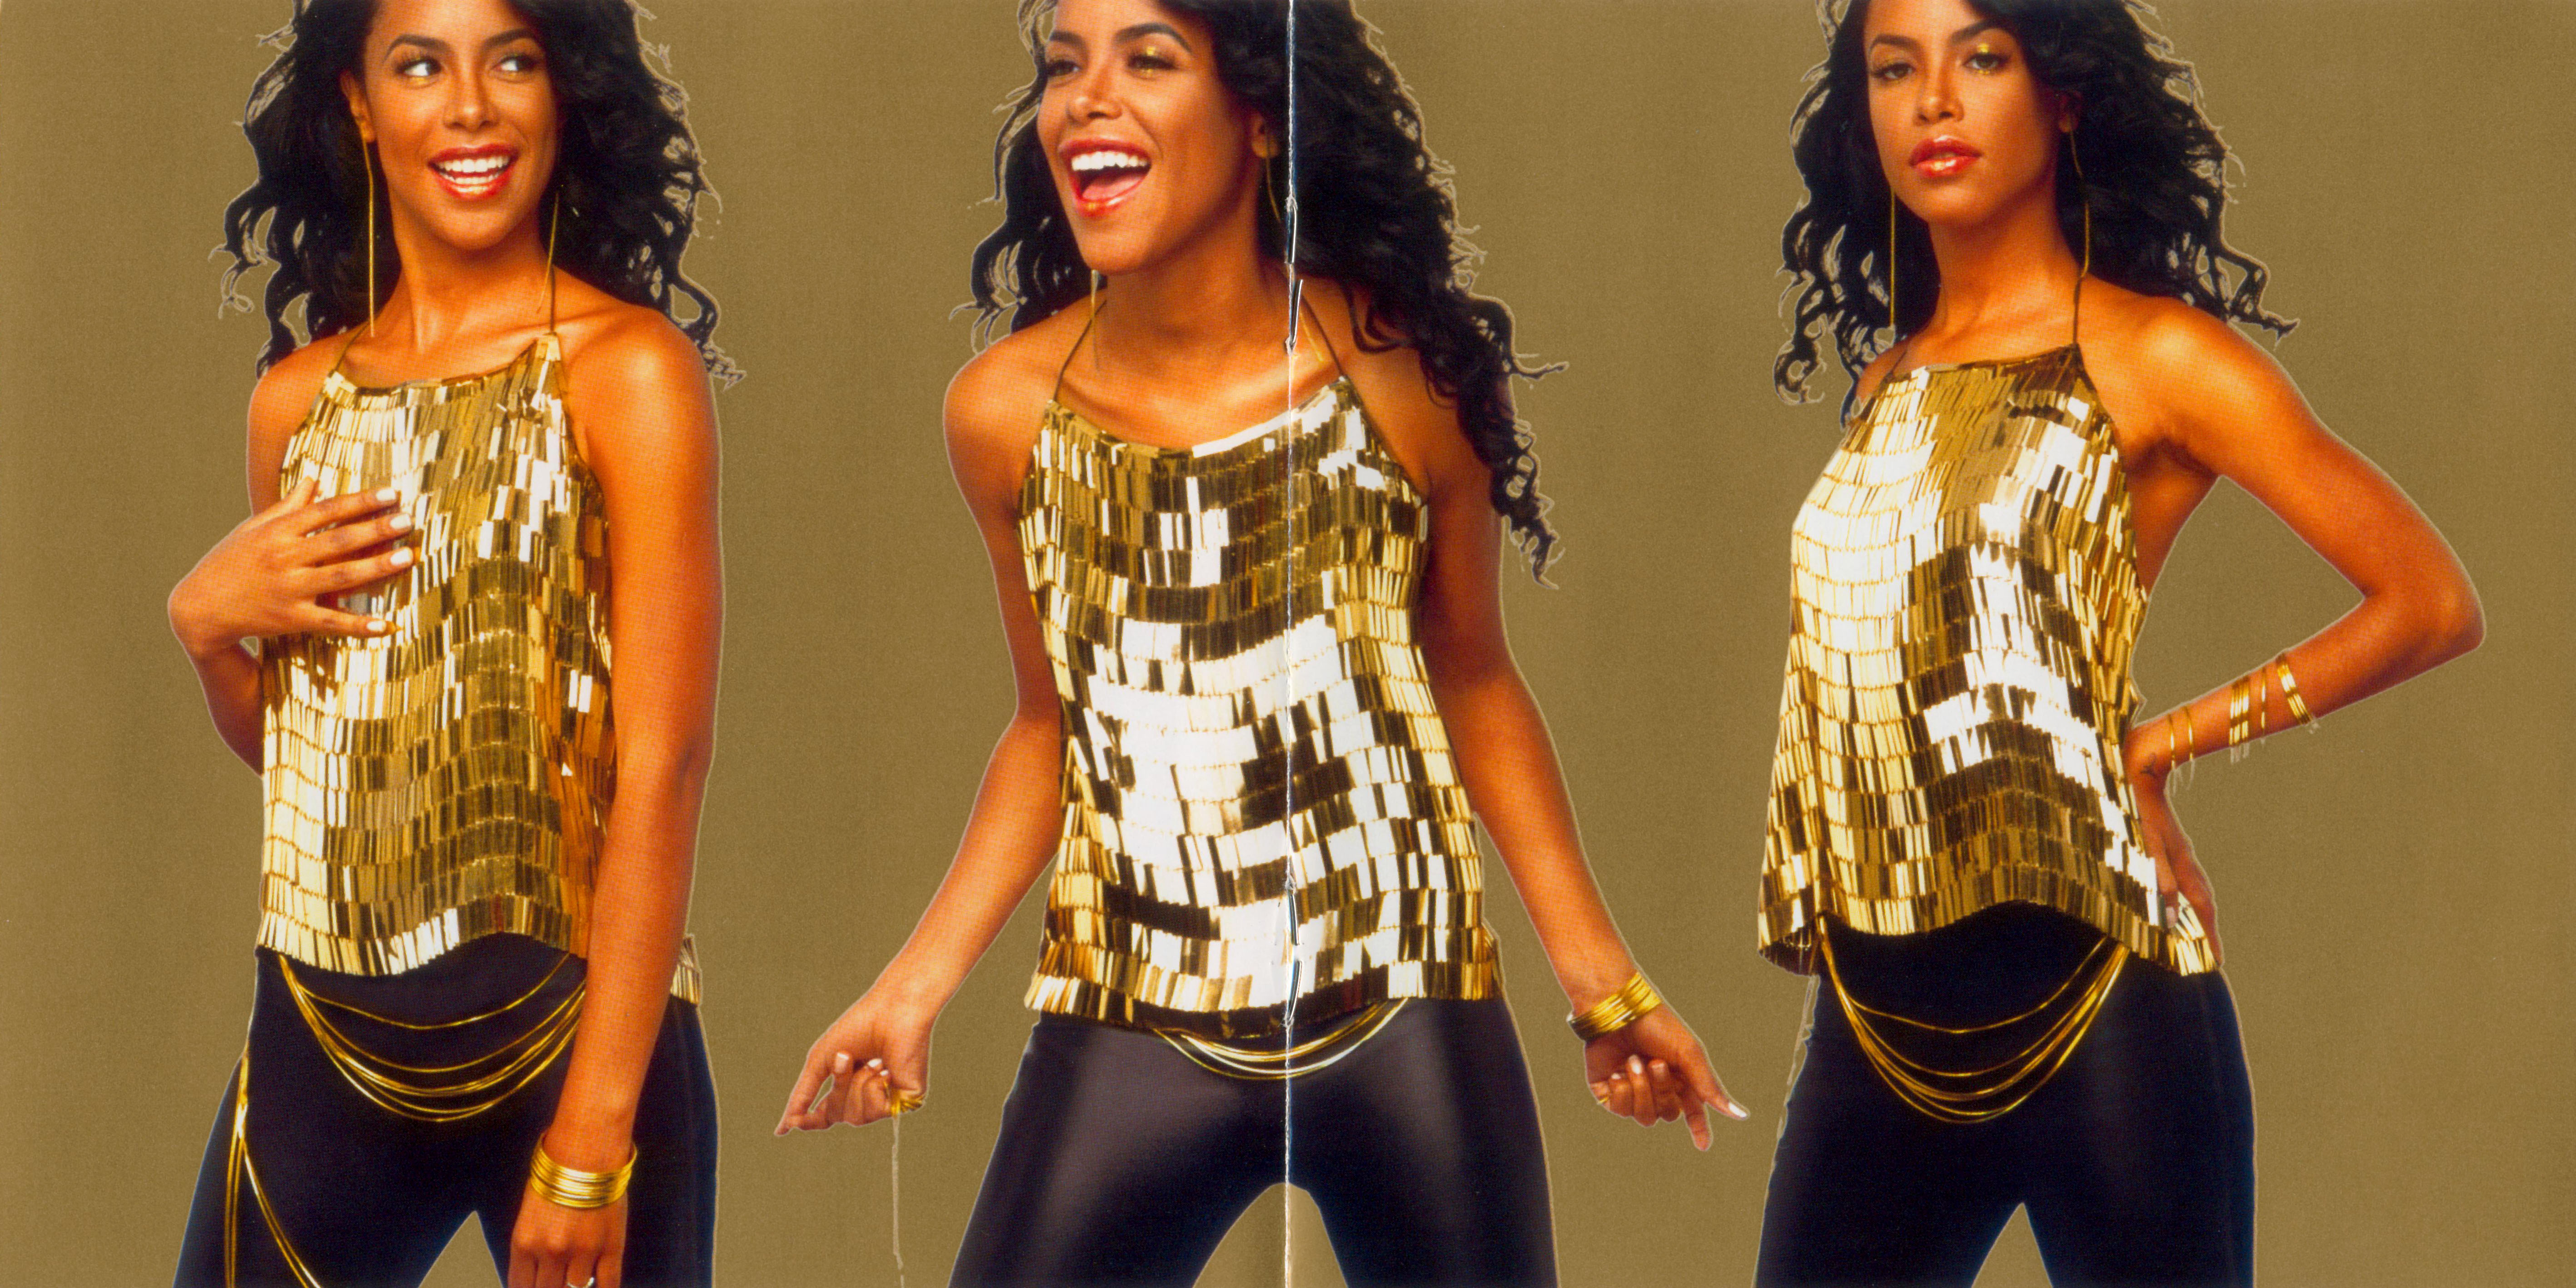 With New Music on the Way, is Aaliyah's Legacy at Risk? (Editorial)